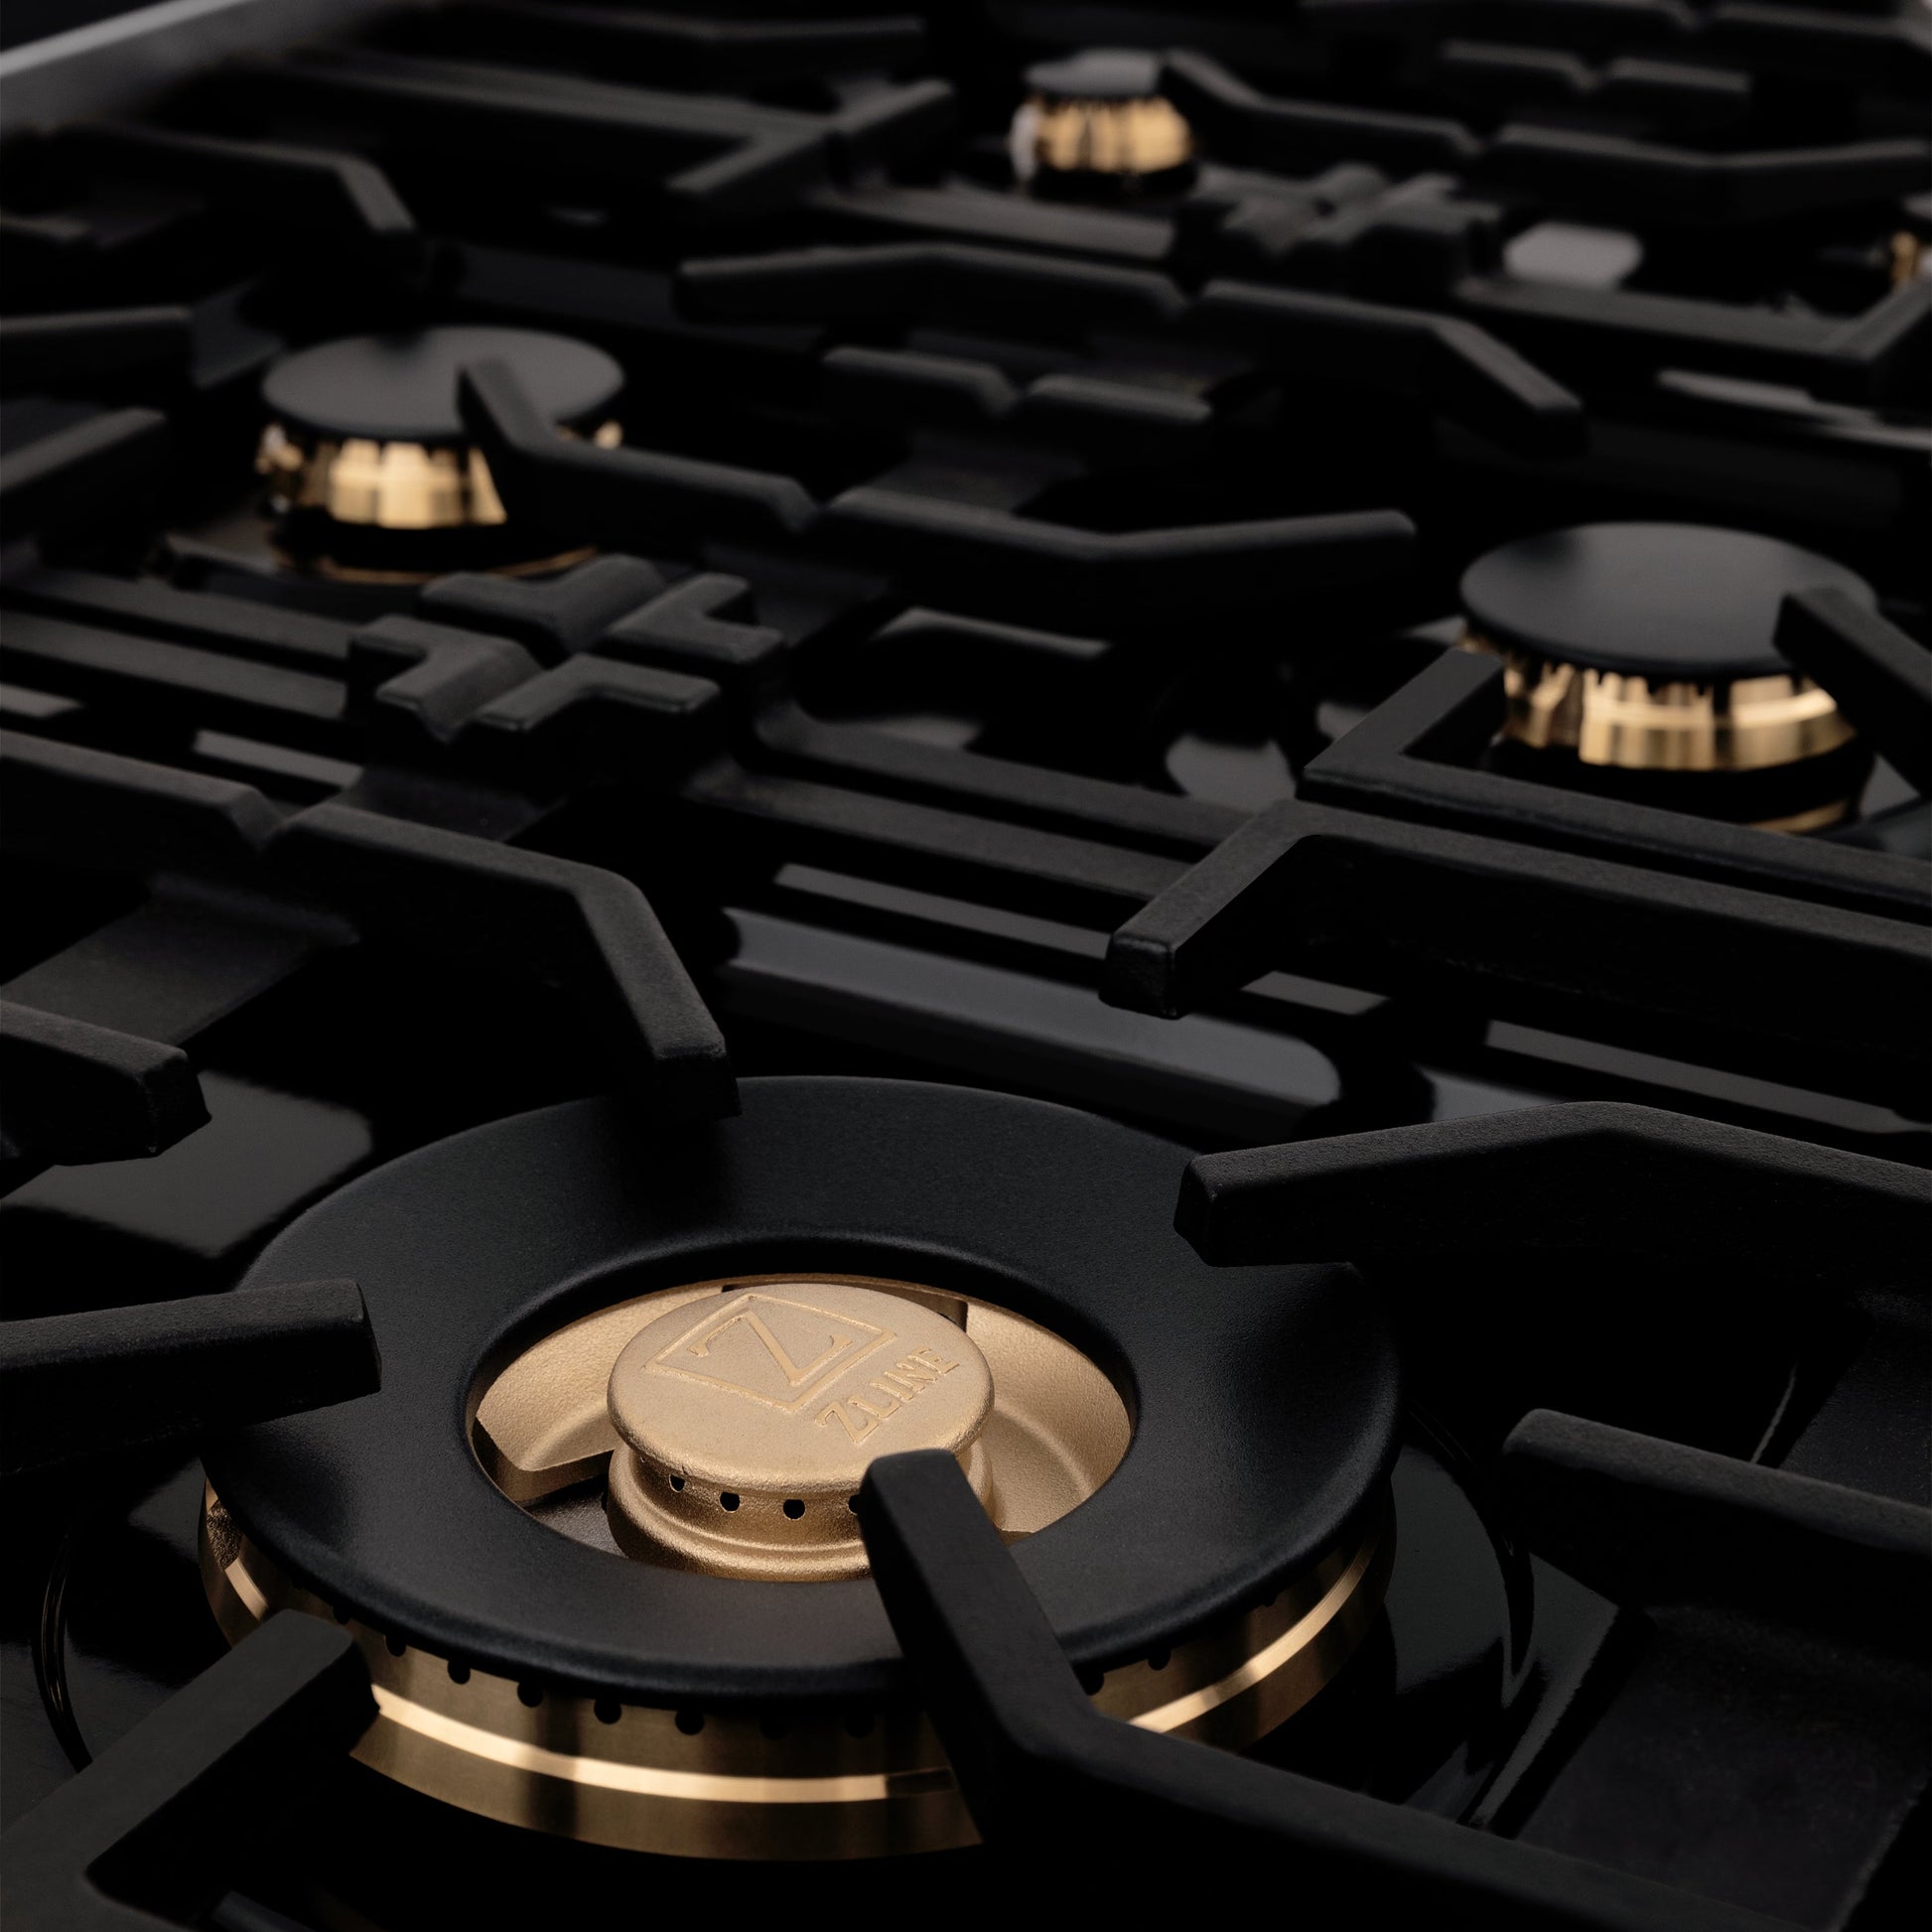 ZLINE Autograph Edition 36" Porcelain Rangetop with 6 Gas Burners - Black Stainless Steel with Accent Options